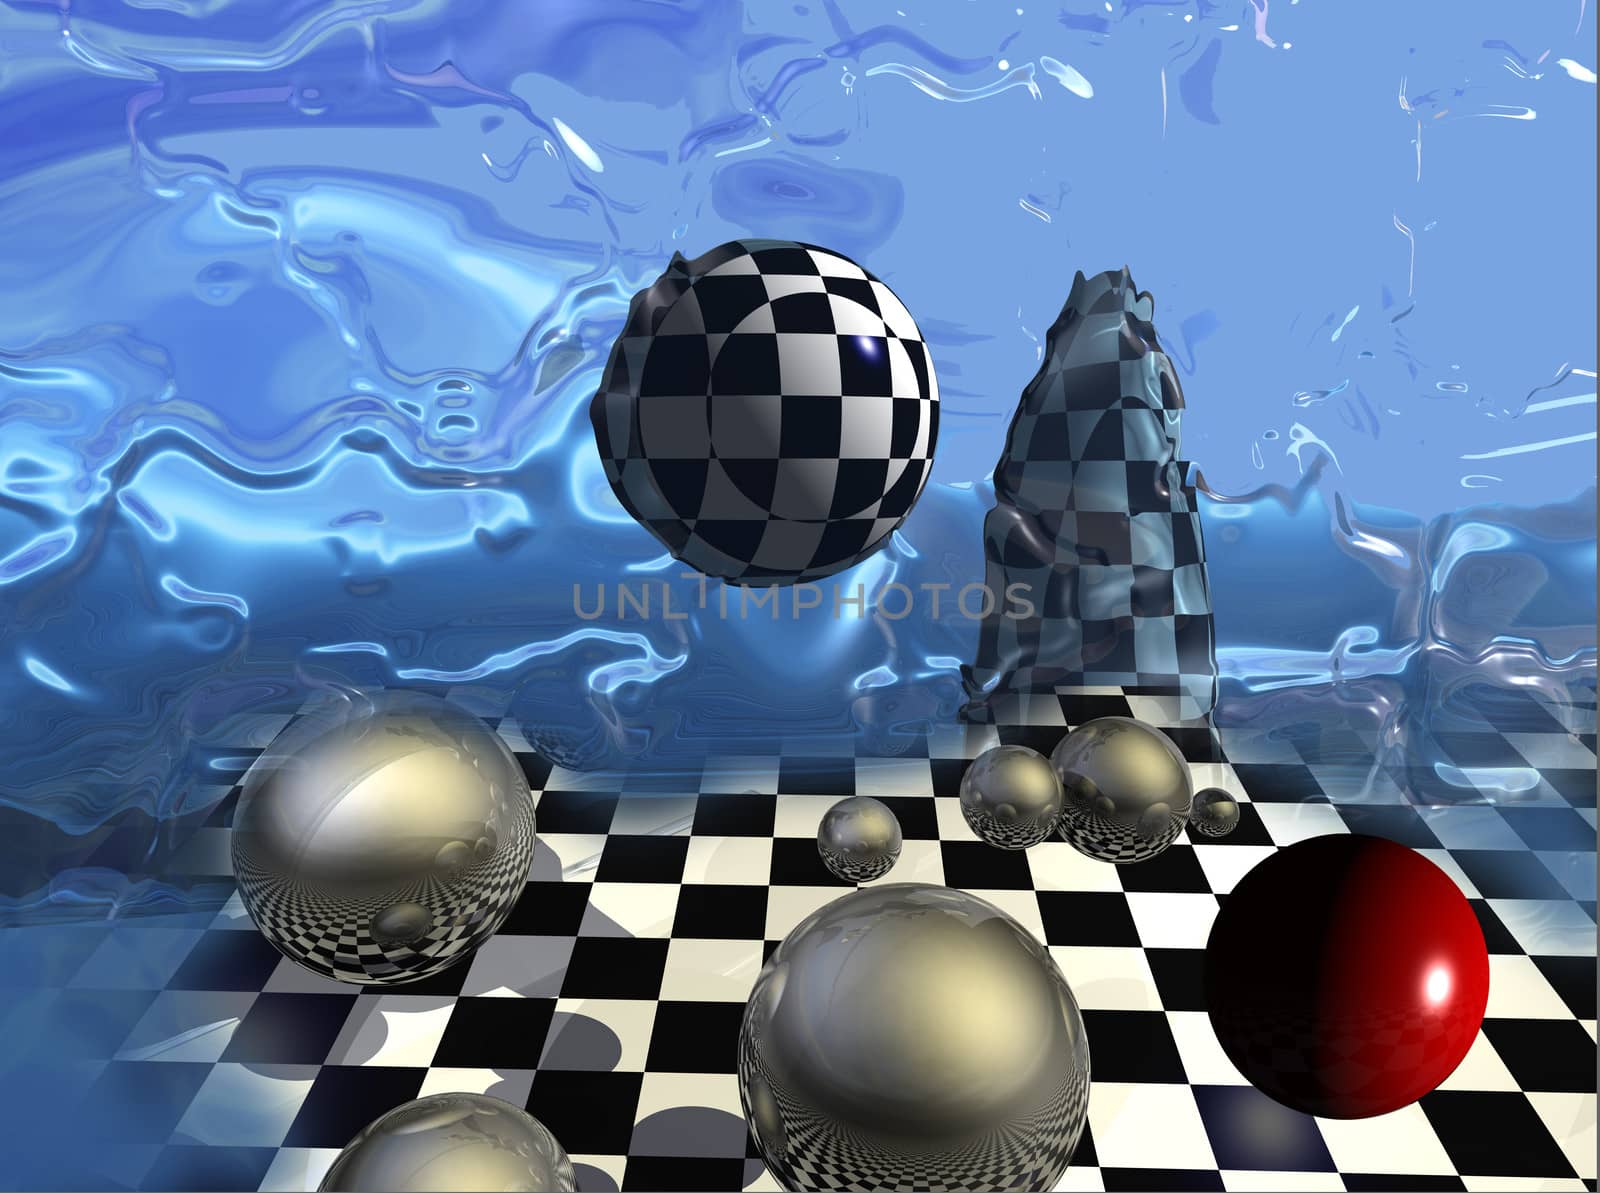 Checkered composition background on blue background made in 3d